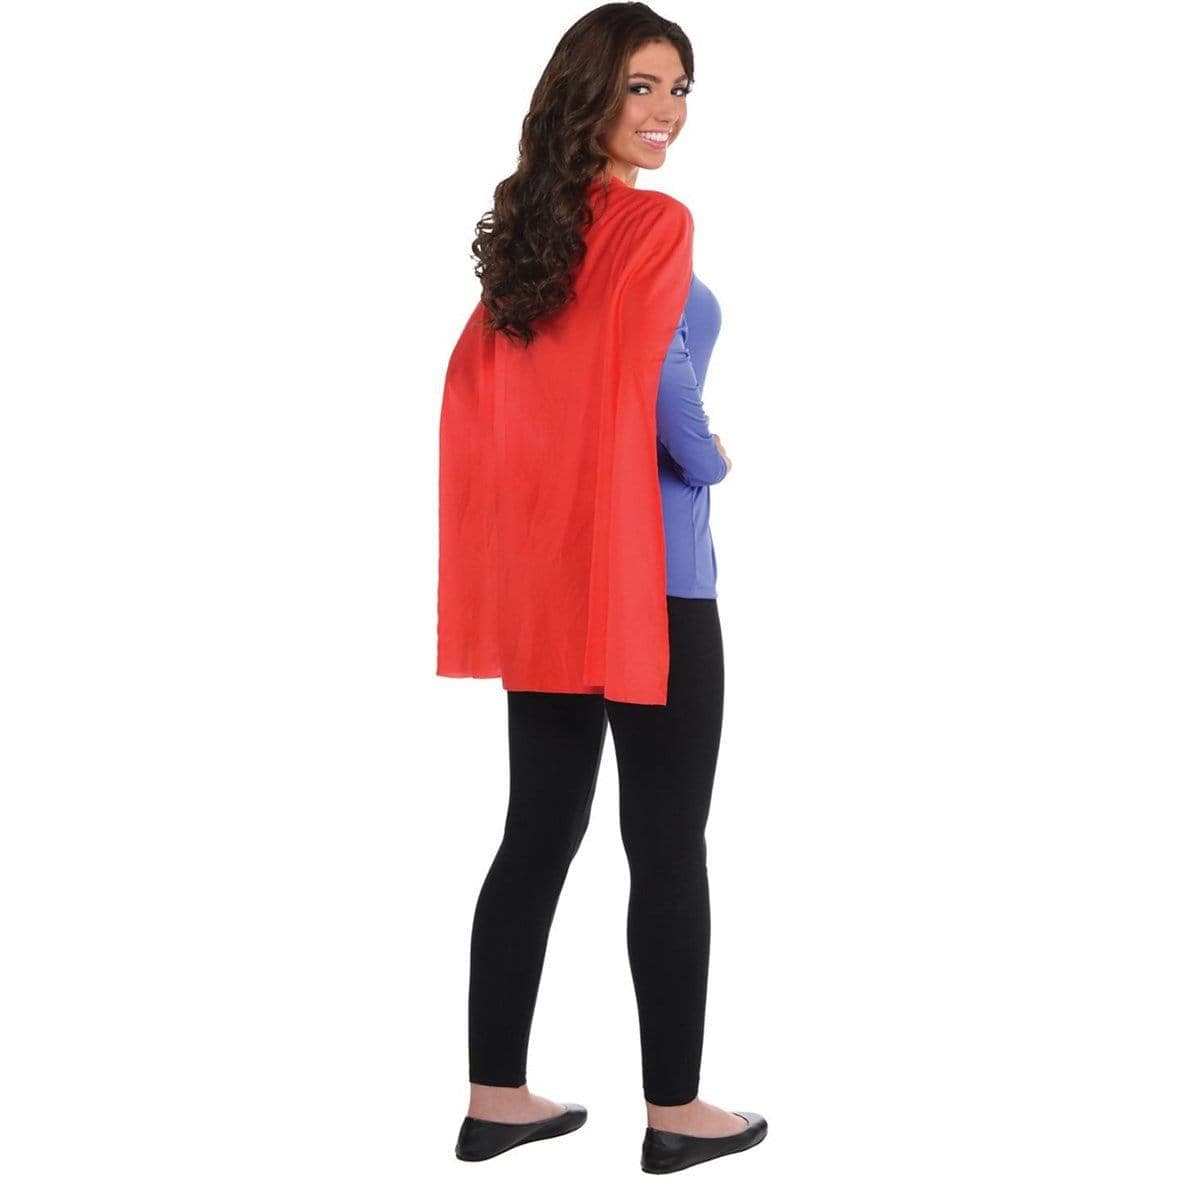 Buy Costume Accessories Red cape for adults sold at Party Expert